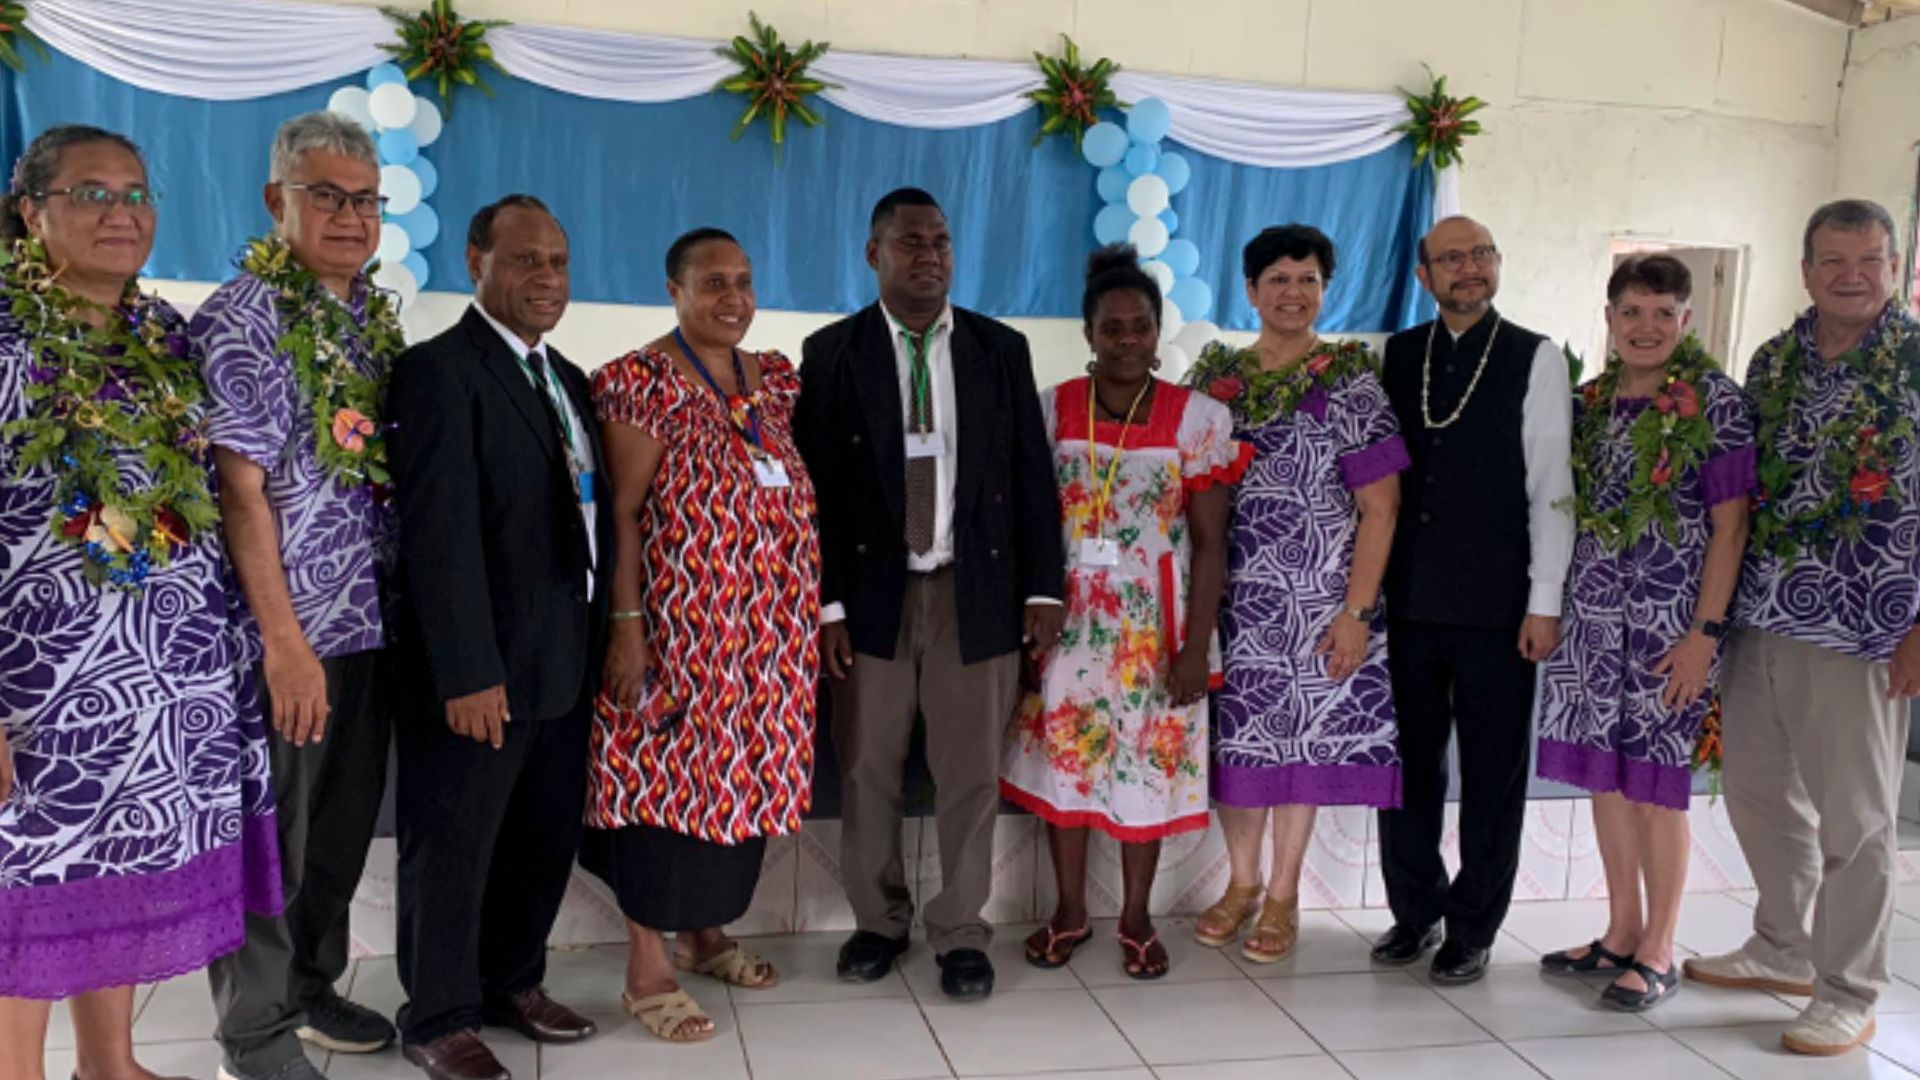 Rev. Gideon Iawaki appointed first local District Superintendent for Vanuatu District